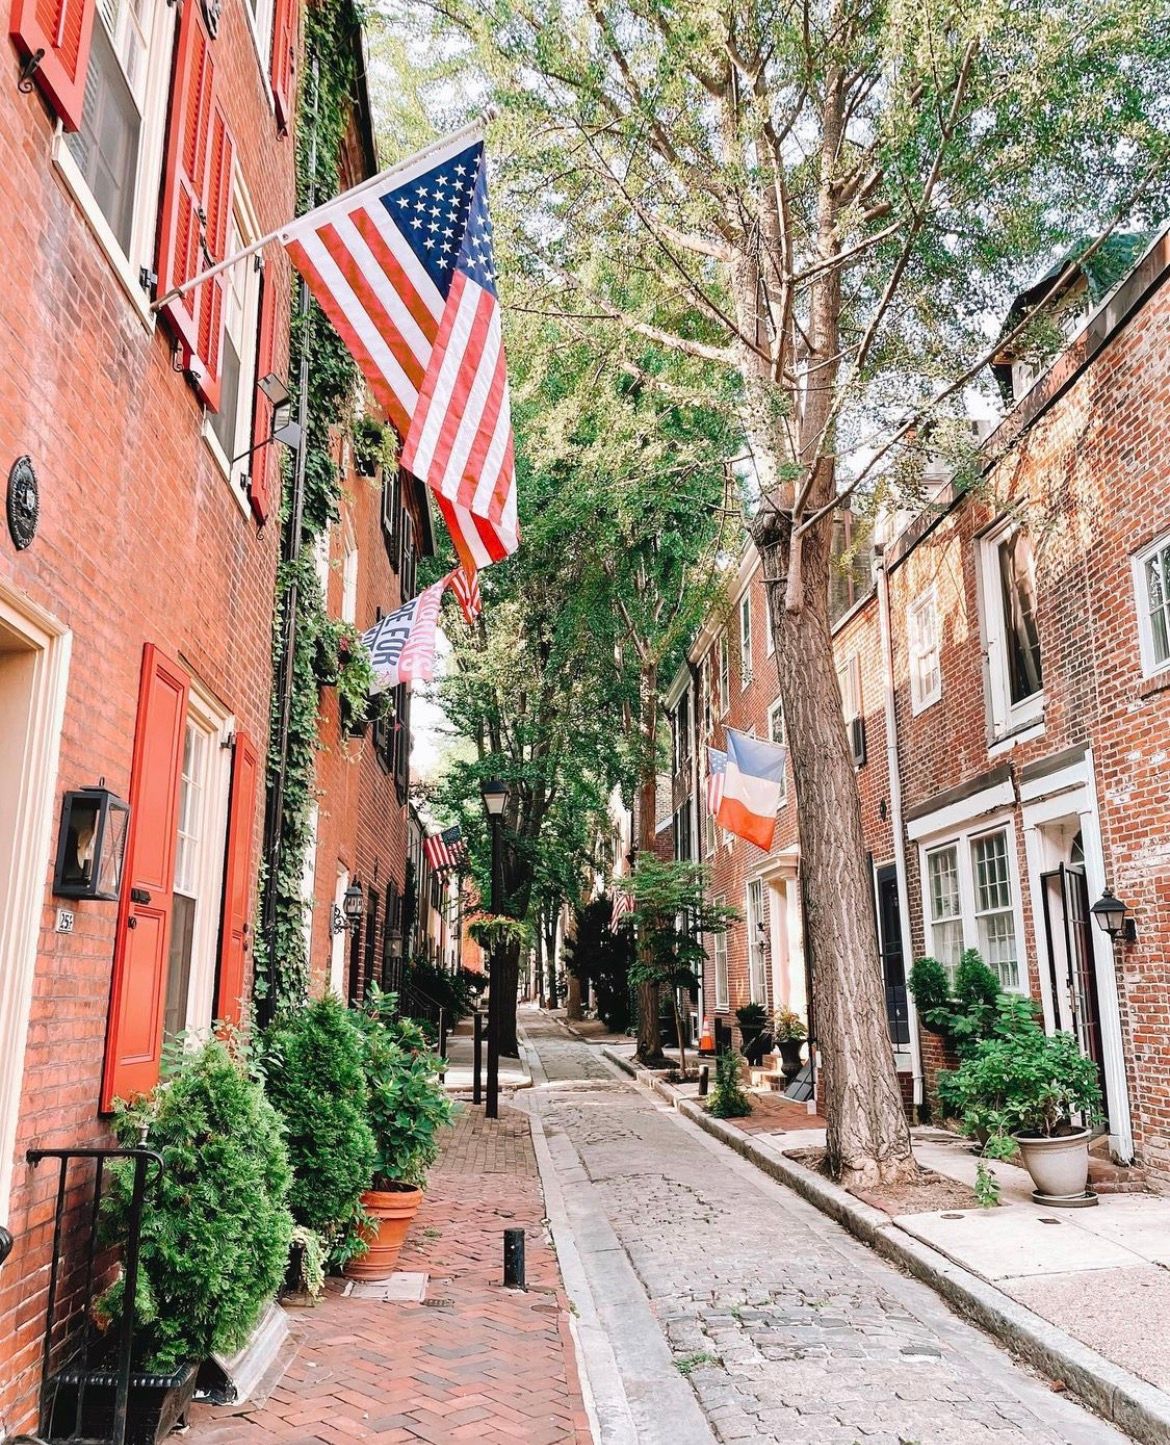 Our very colonial street in Philadelphia